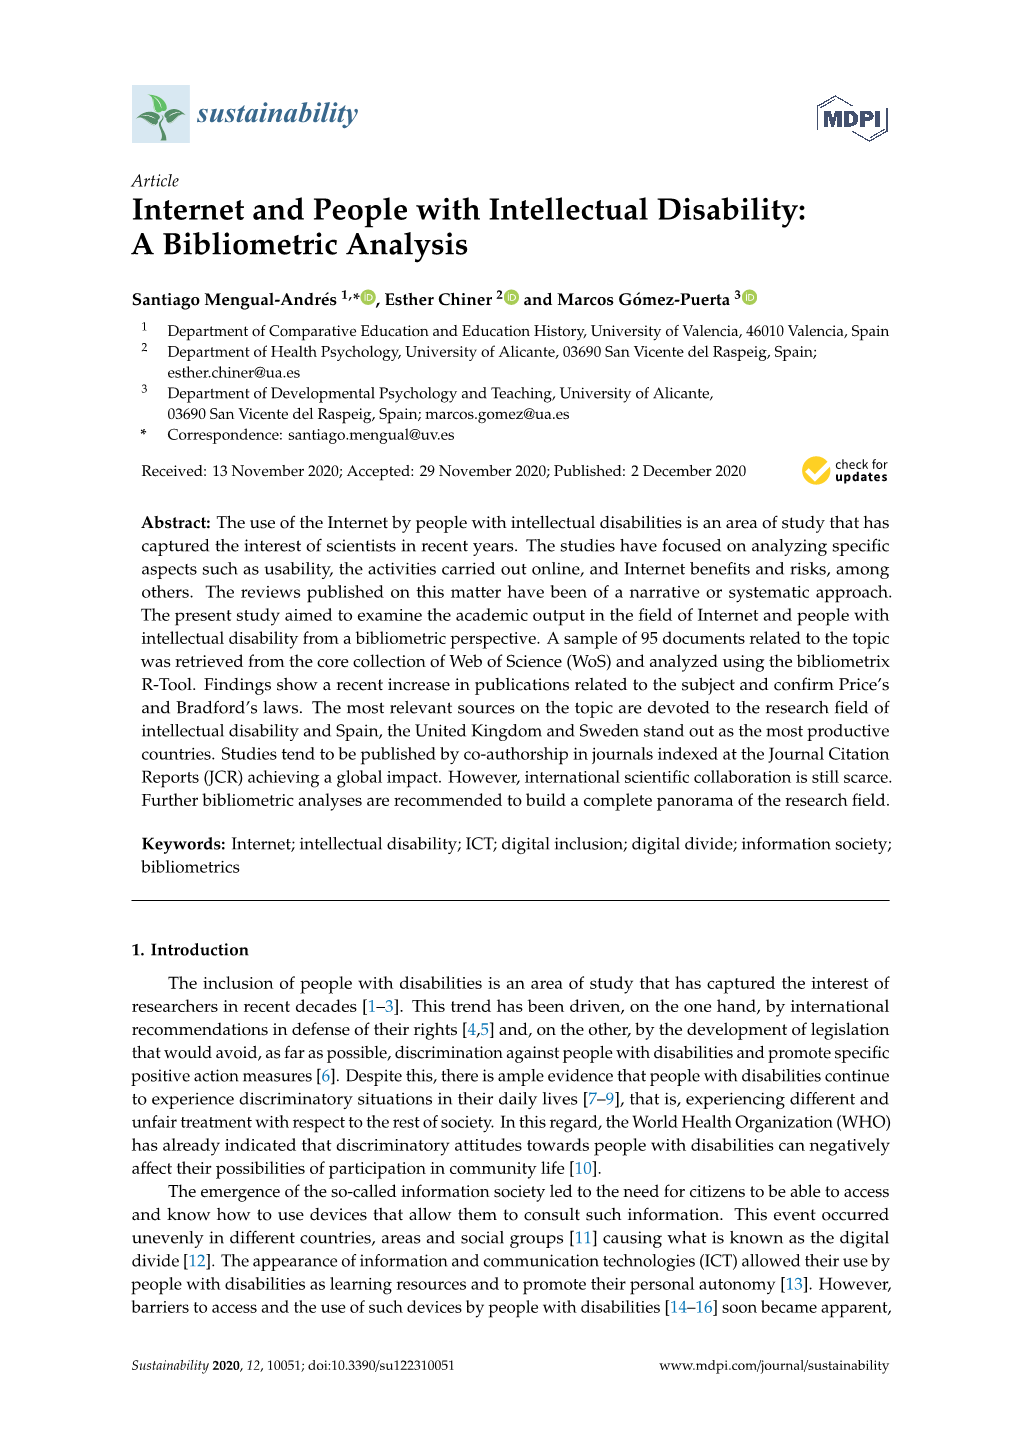 Internet and People with Intellectual Disability: a Bibliometric Analysis